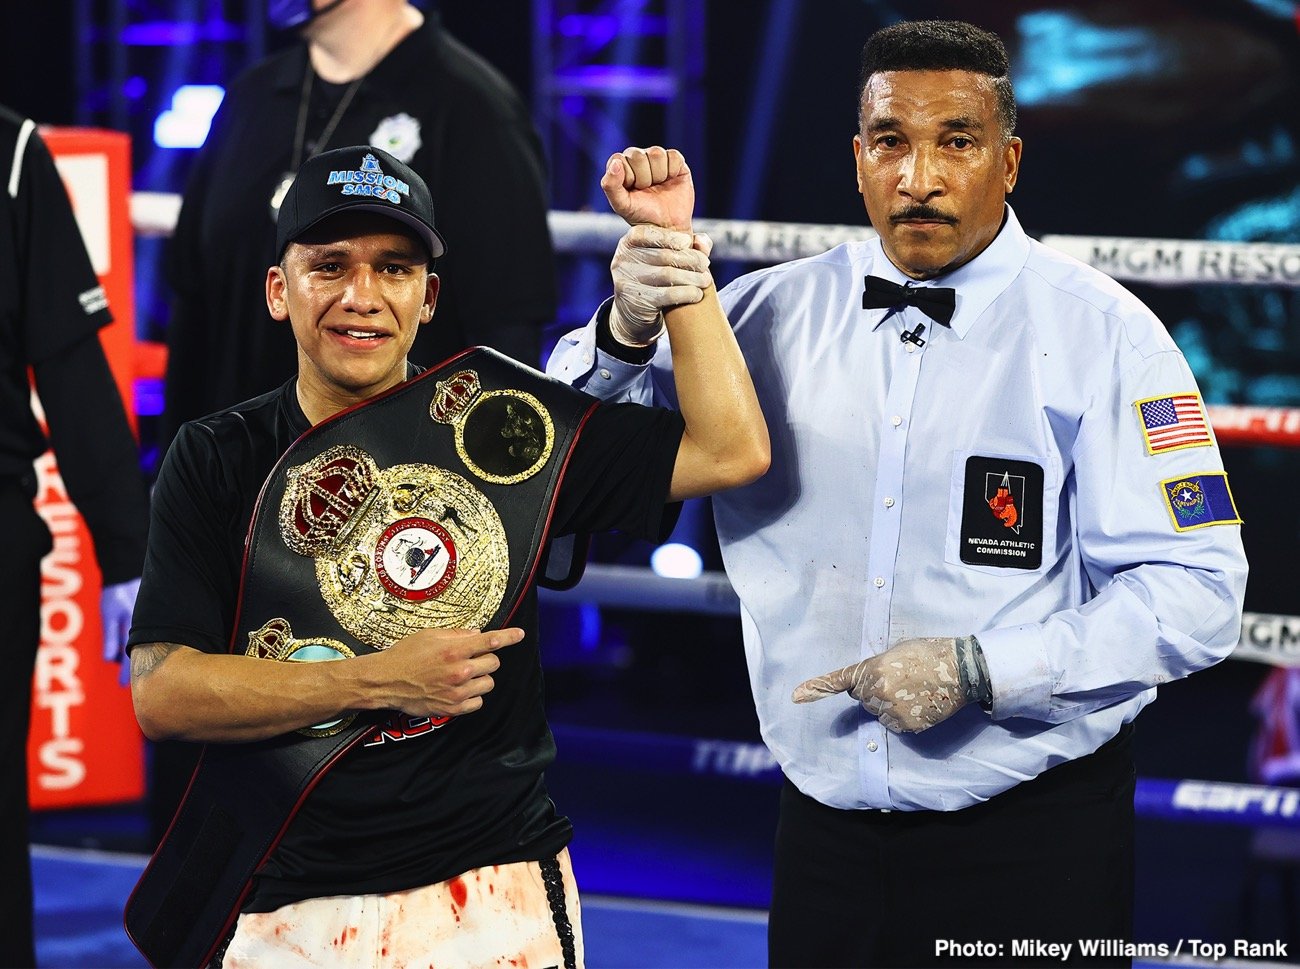 Image: Joshua Franco and Kazuto Ioka to meet in rematch in June